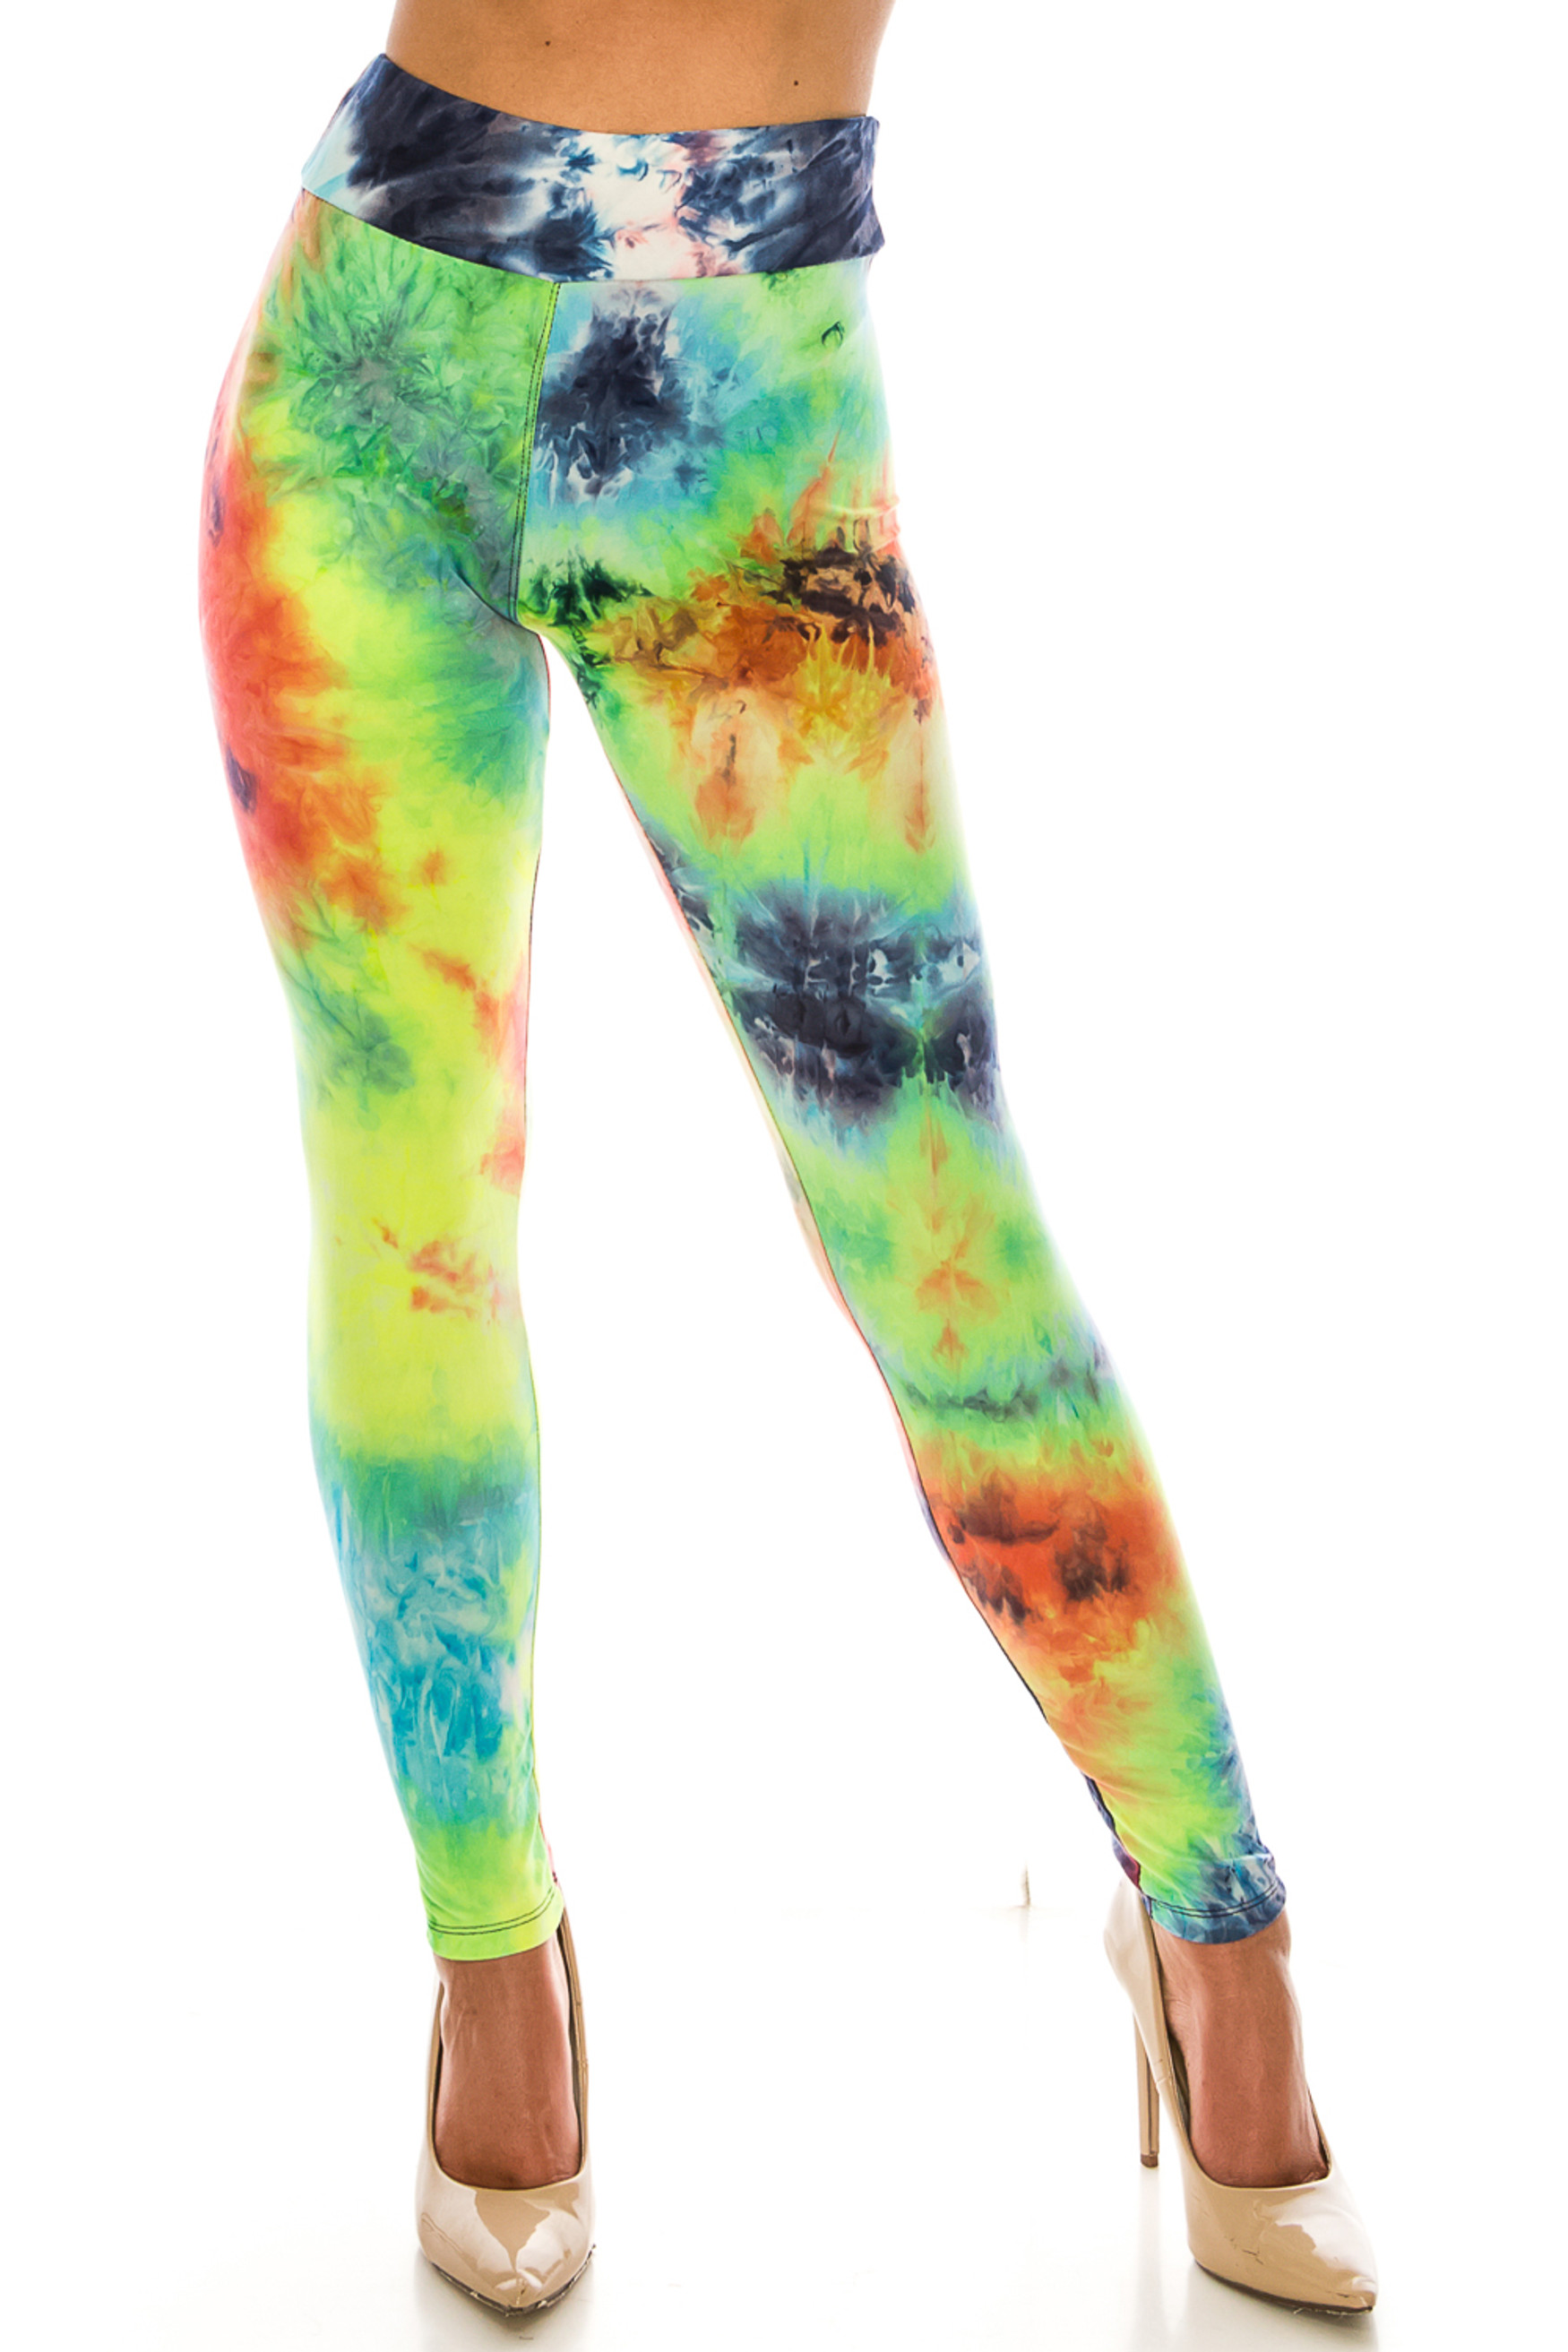 Front side image of Buttery Soft Summer Yellow Tie Dye High Waisted Leggings - Plus Size with a vibrant multi-colored design.